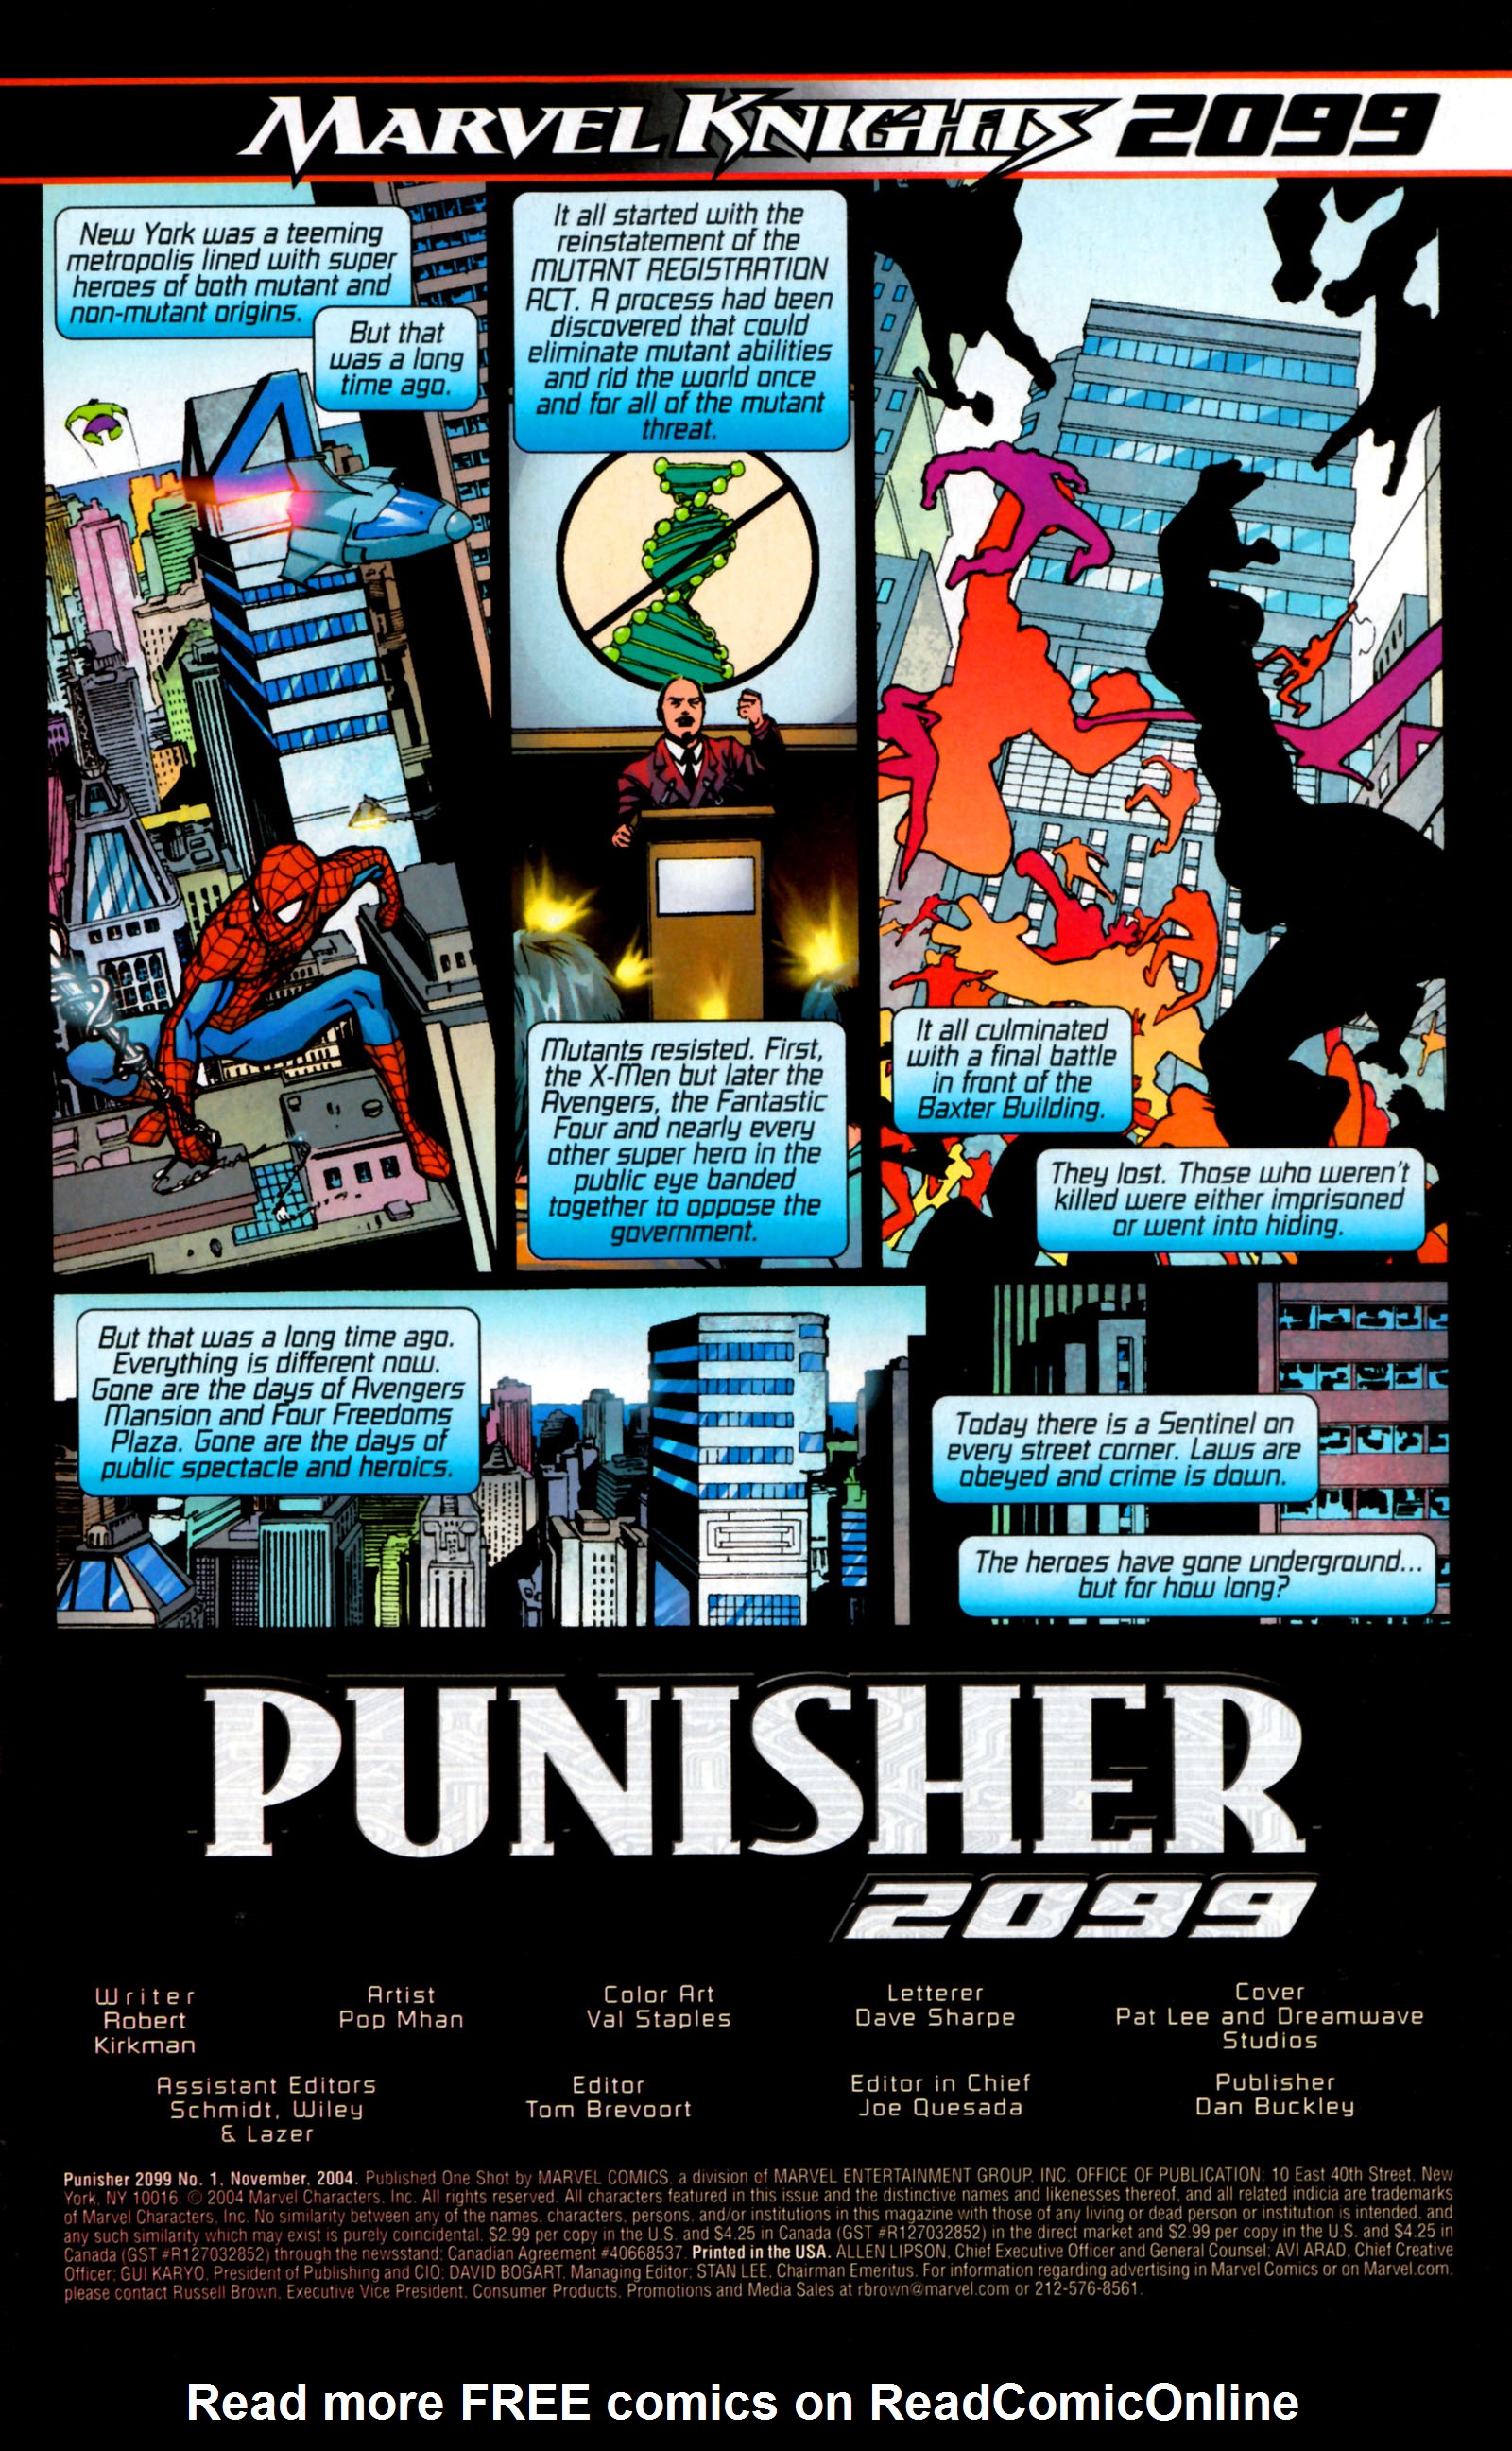 Read online The Punisher 2099 comic -  Issue # Full - 2